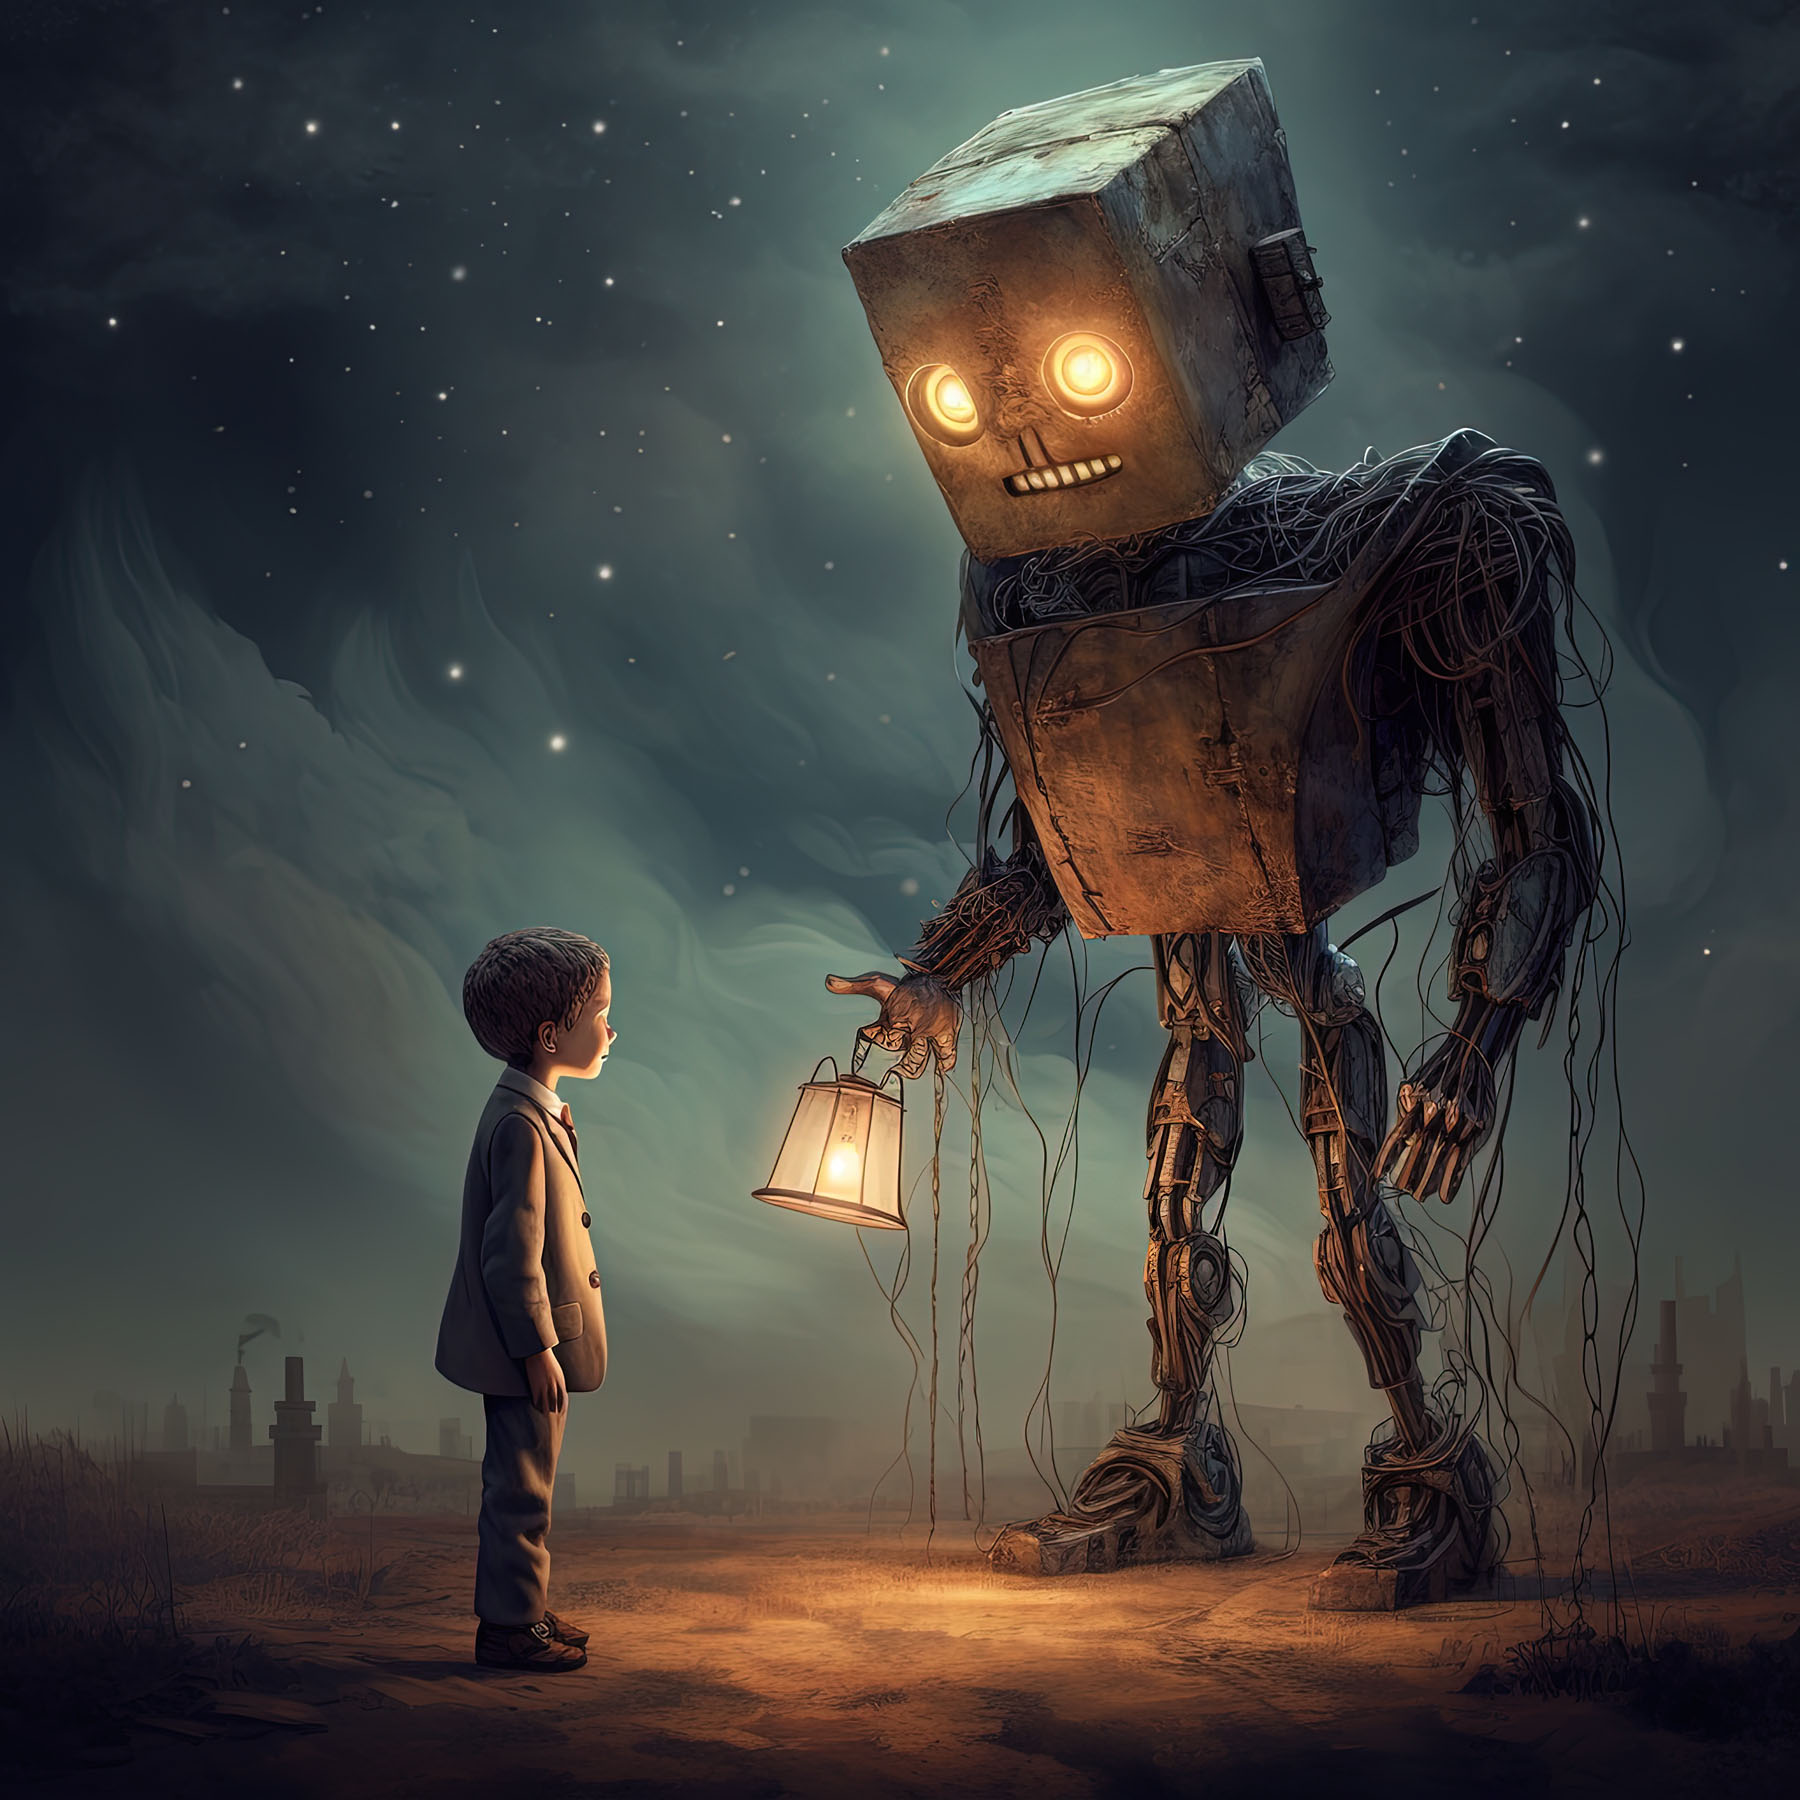 In a dimly lit starry skied landscape, a young boy looks up at a robot with big glowing eyes and a box head. The robot is holding a lantern.